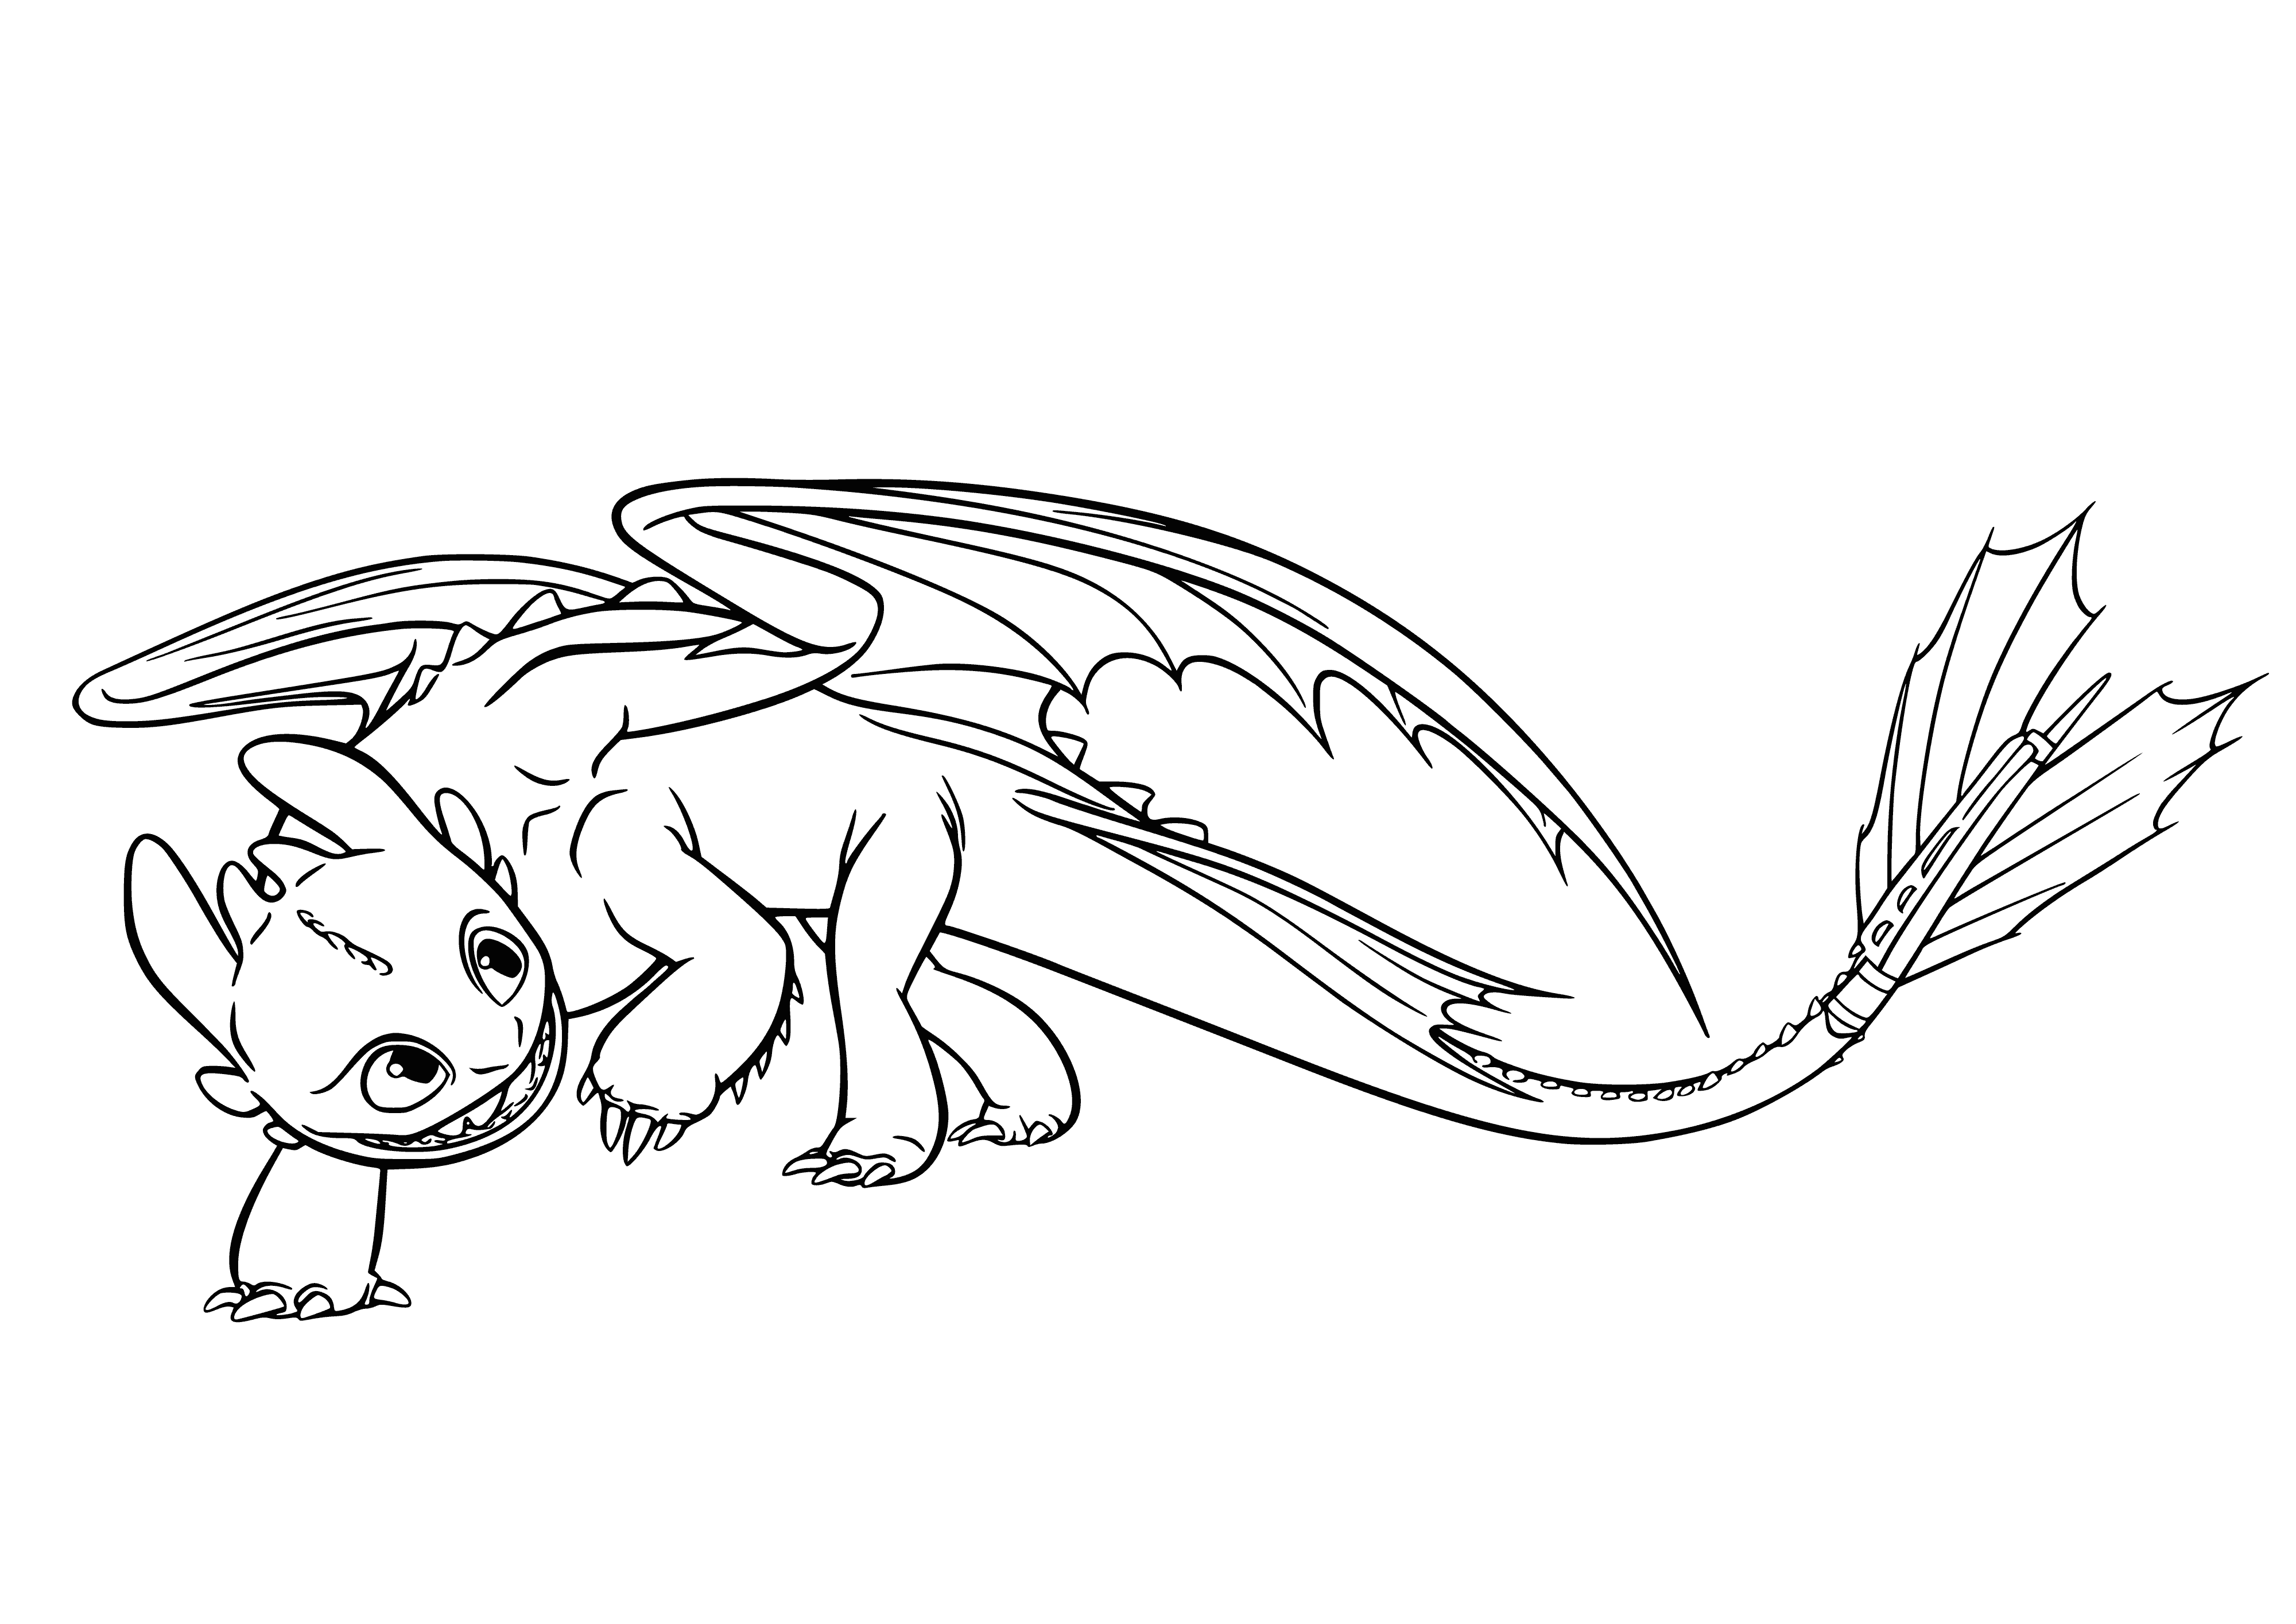 coloring page: The Night Fury is feared and respected-- the most powerful and dangerous dragon with sleek, black body, huge wings, and bright blue eyes.